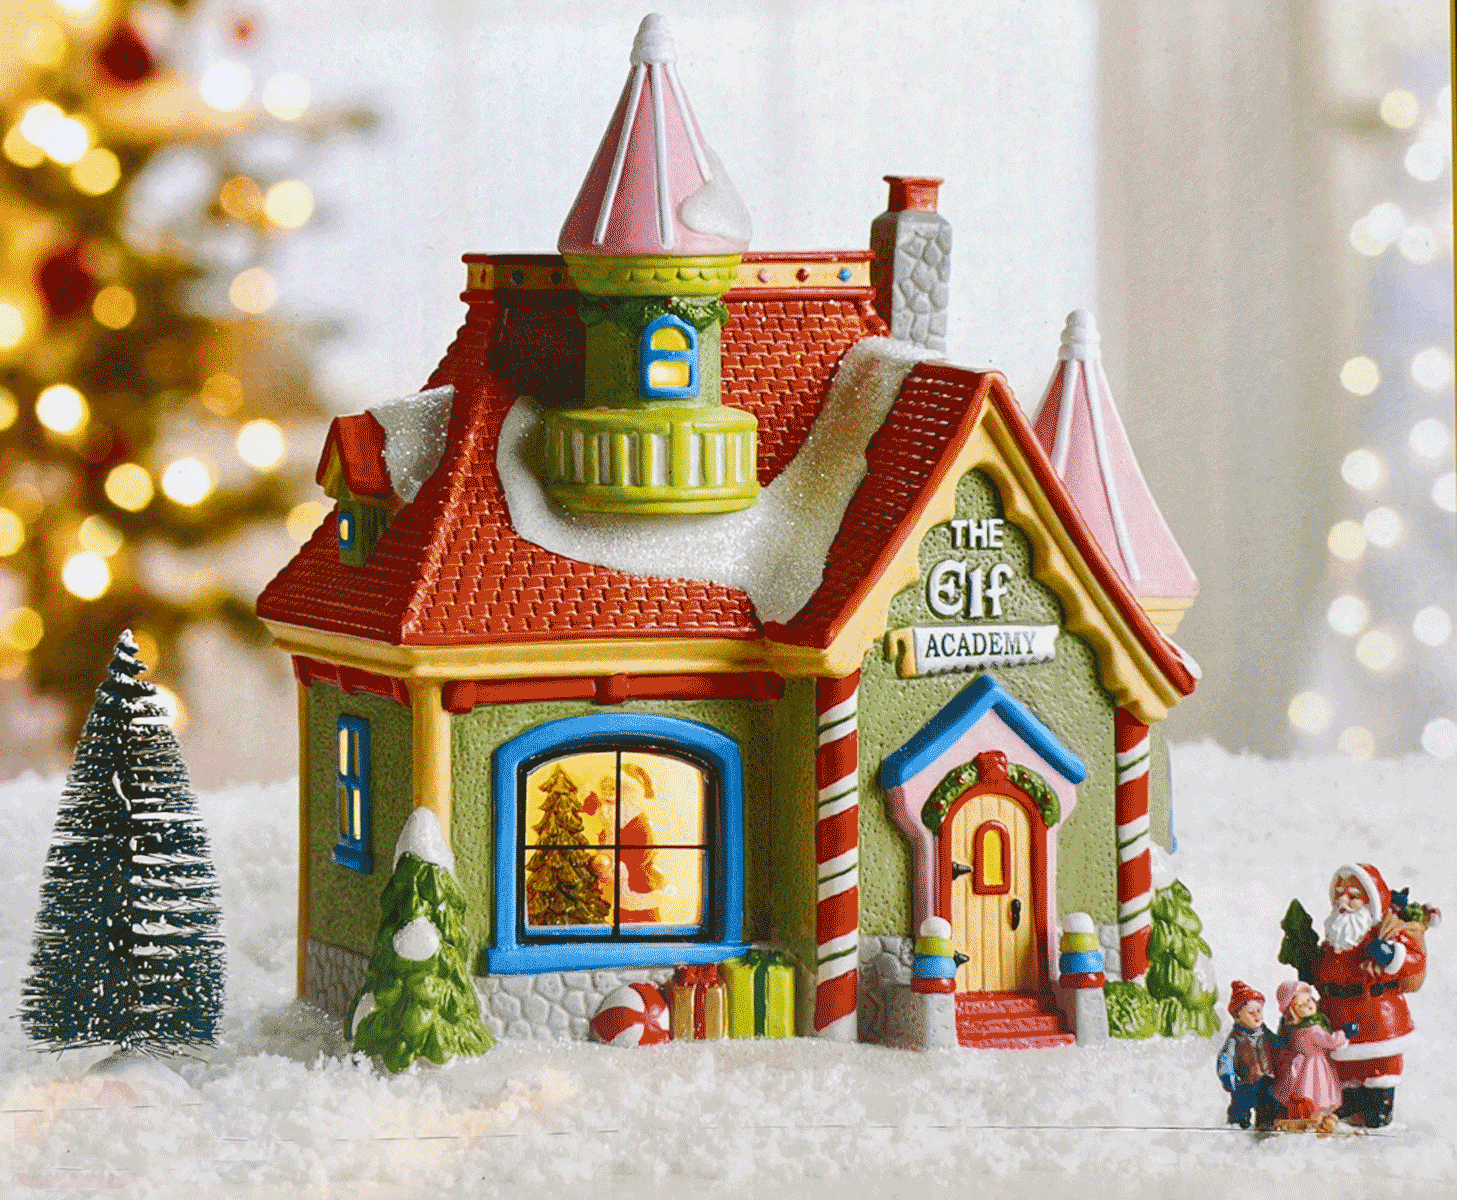 Northeast Home Goods The Elf Academy Porcelain Lighted Christmas Village Building with Accessories - Walmart.com